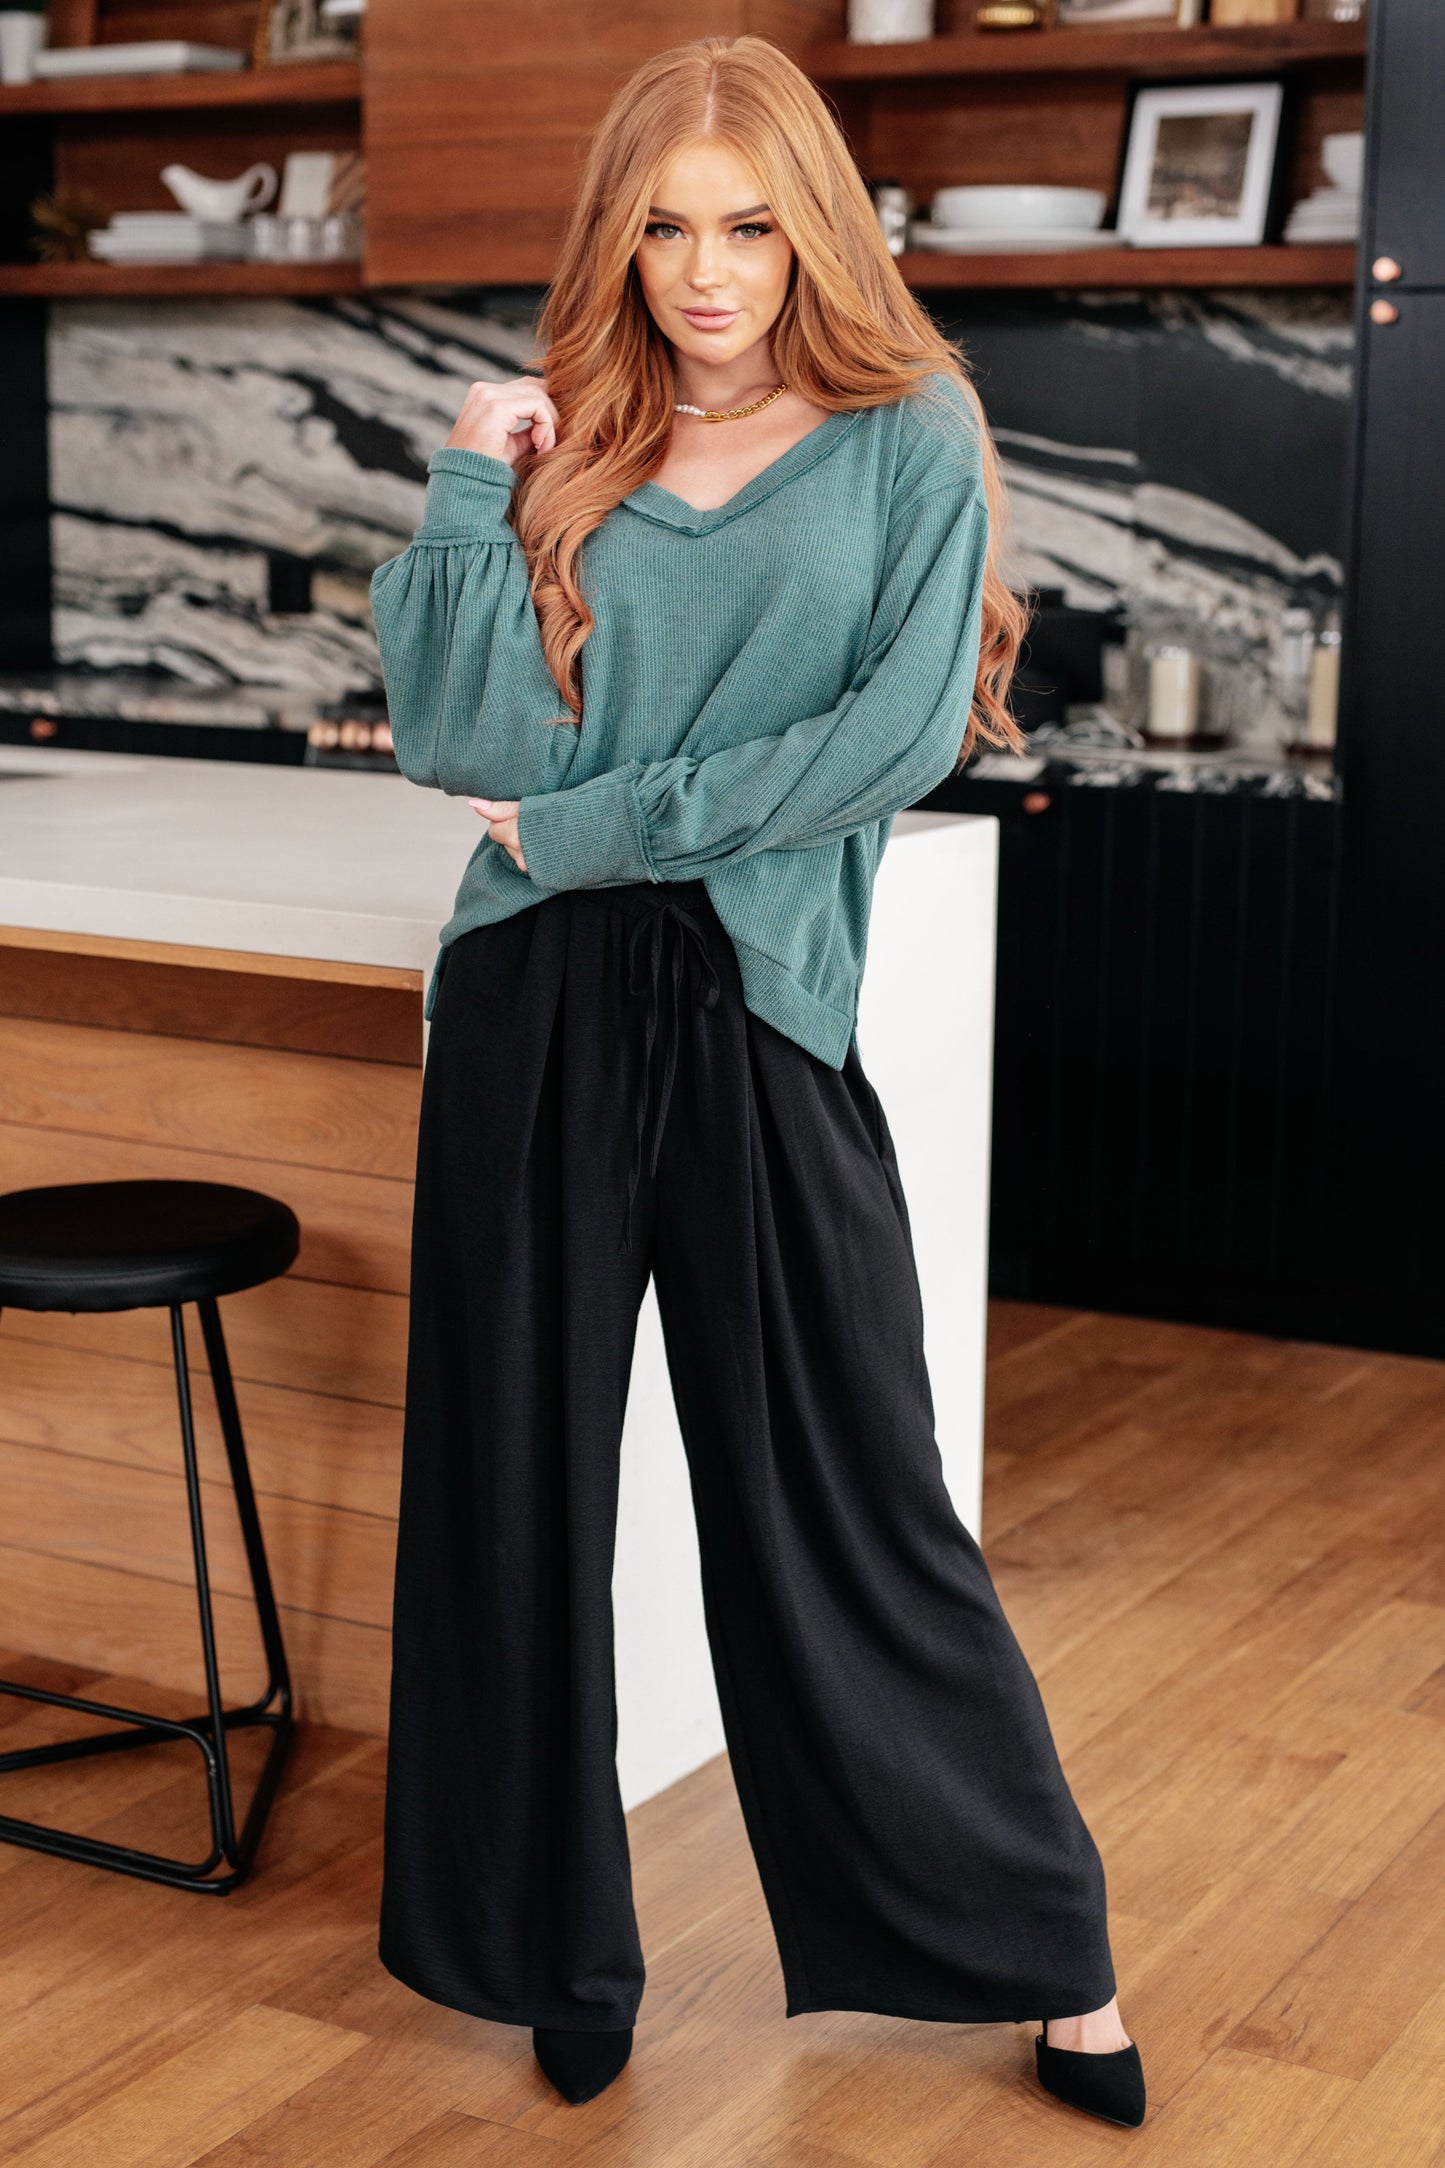 These gorgeous Send it On Wide Leg Pants feature a crinkle woven fabric, a cased elastic waistband, a functional drawstring, and flattering front pleats - for a stylish wide leg silhouette. Perfect for any occasion, these pants promise serious comfort and the trendiest looks this season! S - 3X